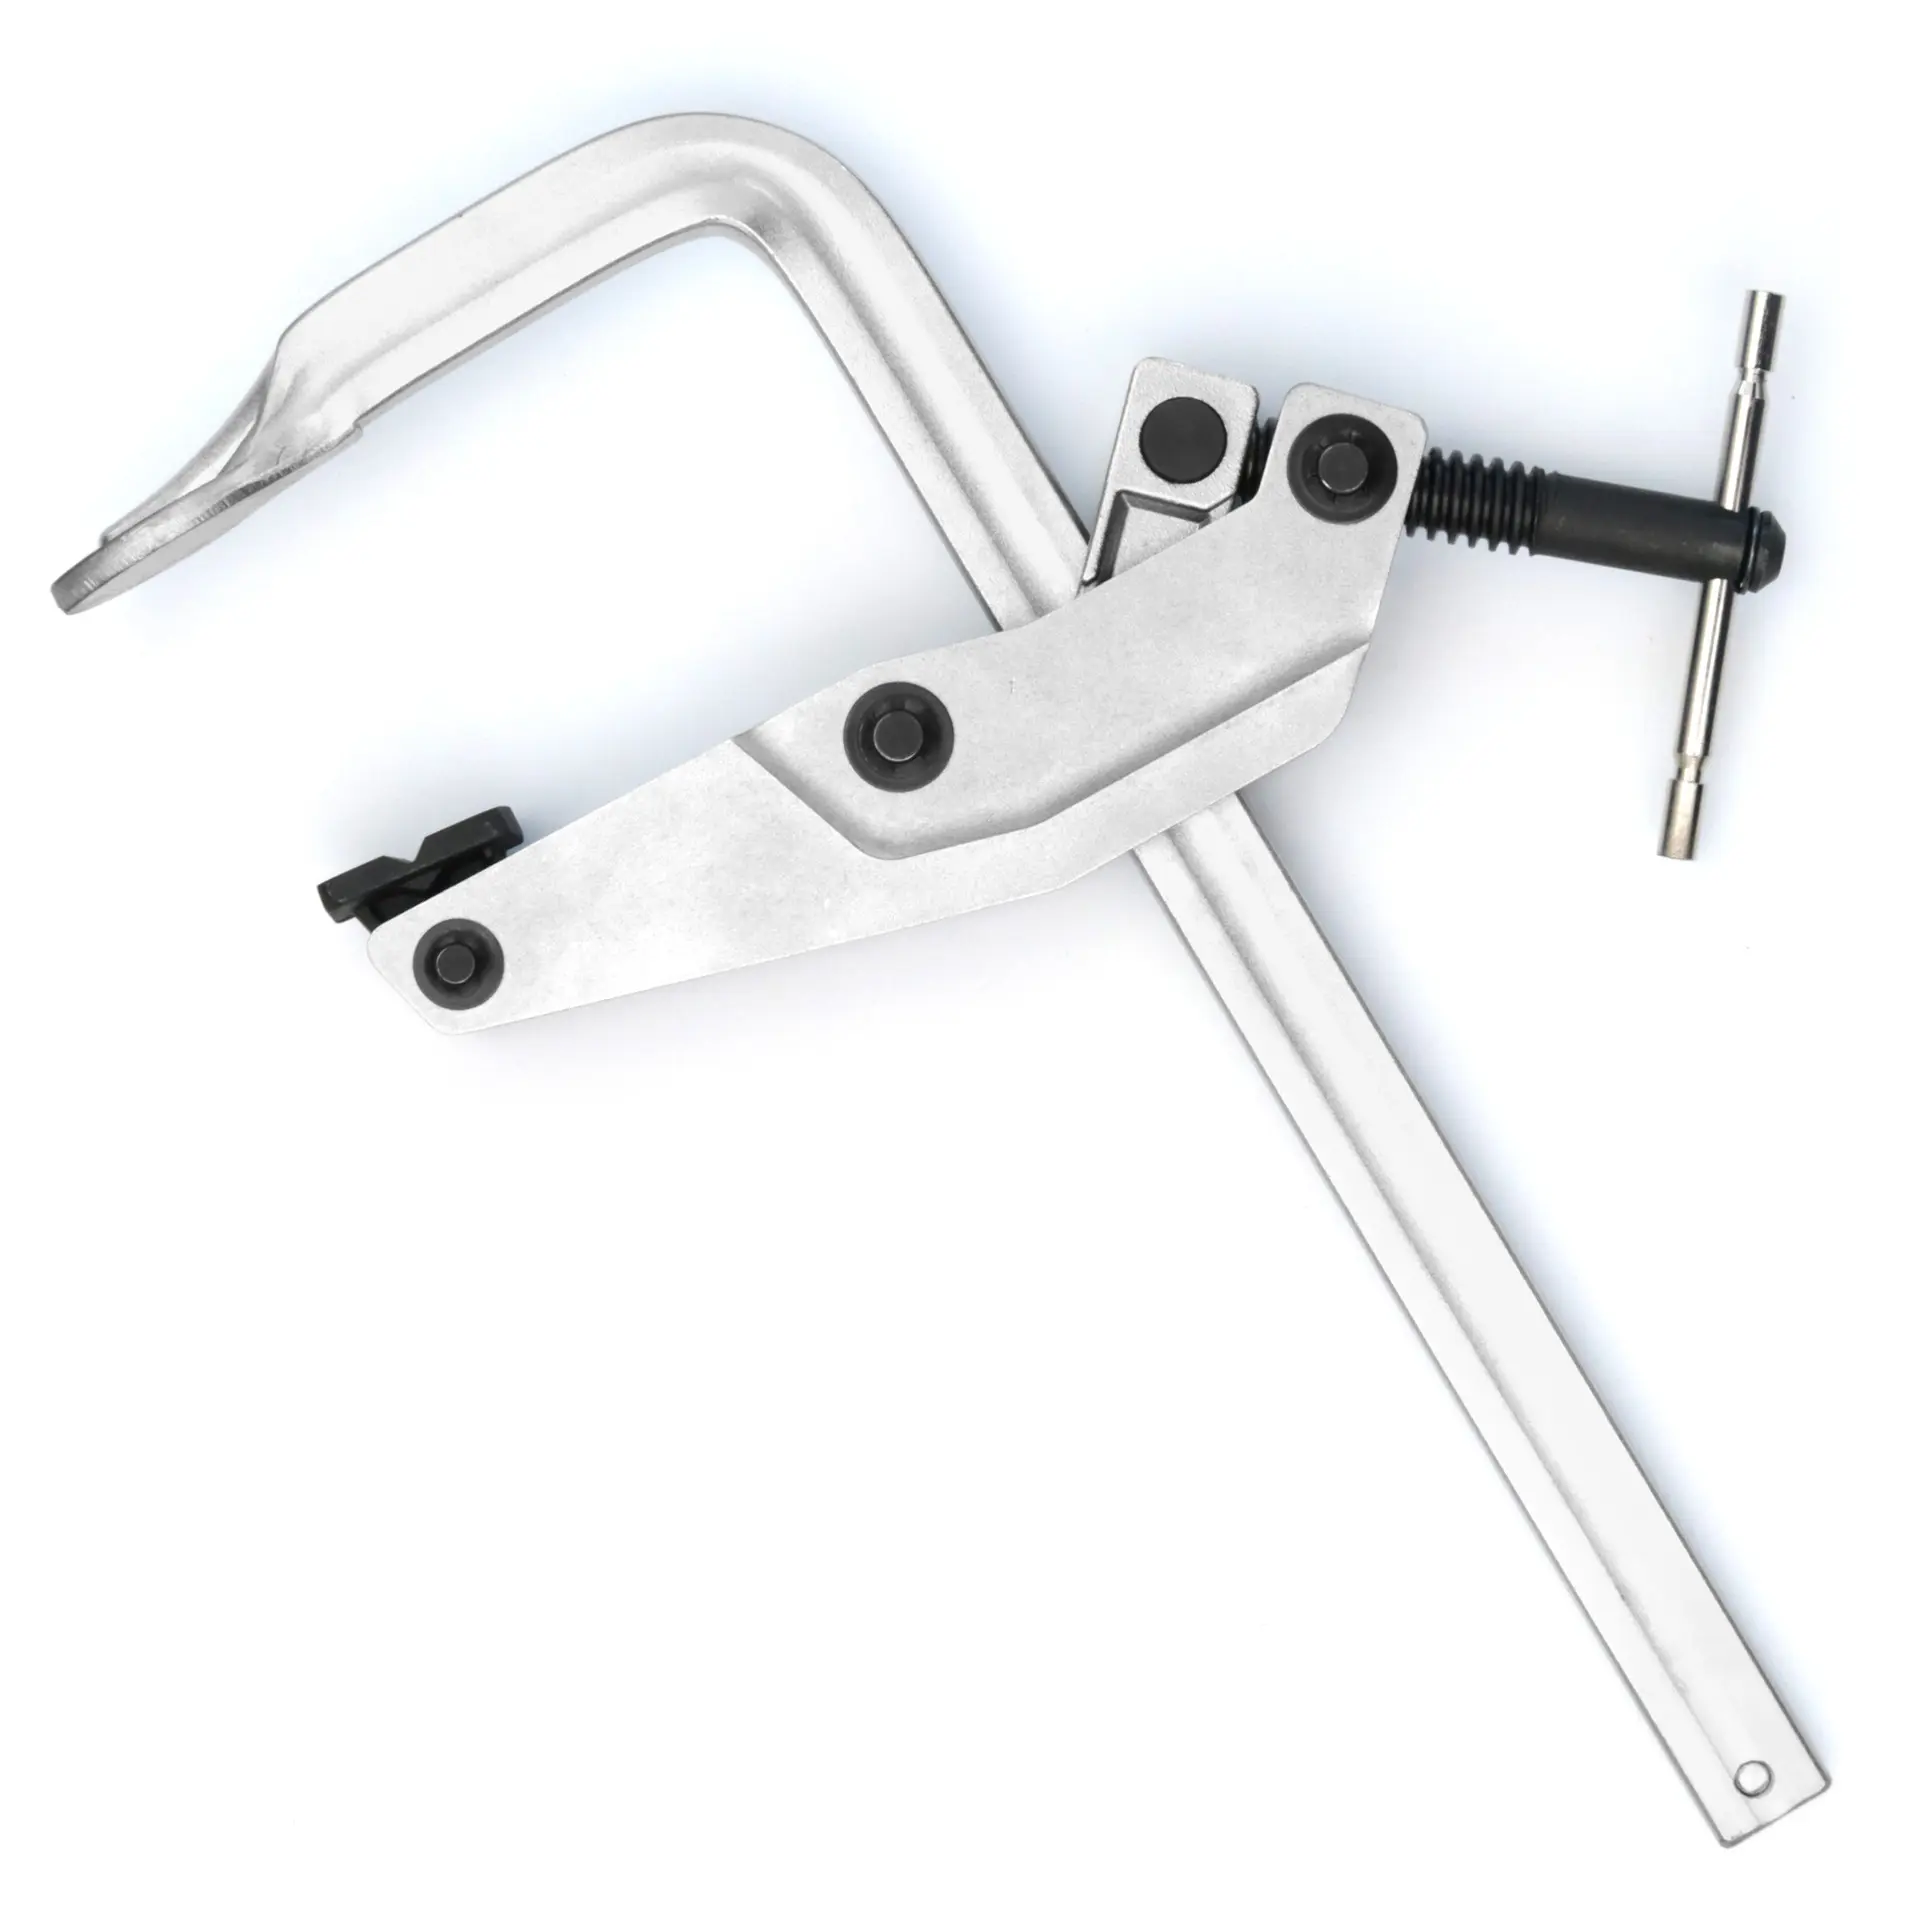 Heavy duty forged screw cantilever type F clamp